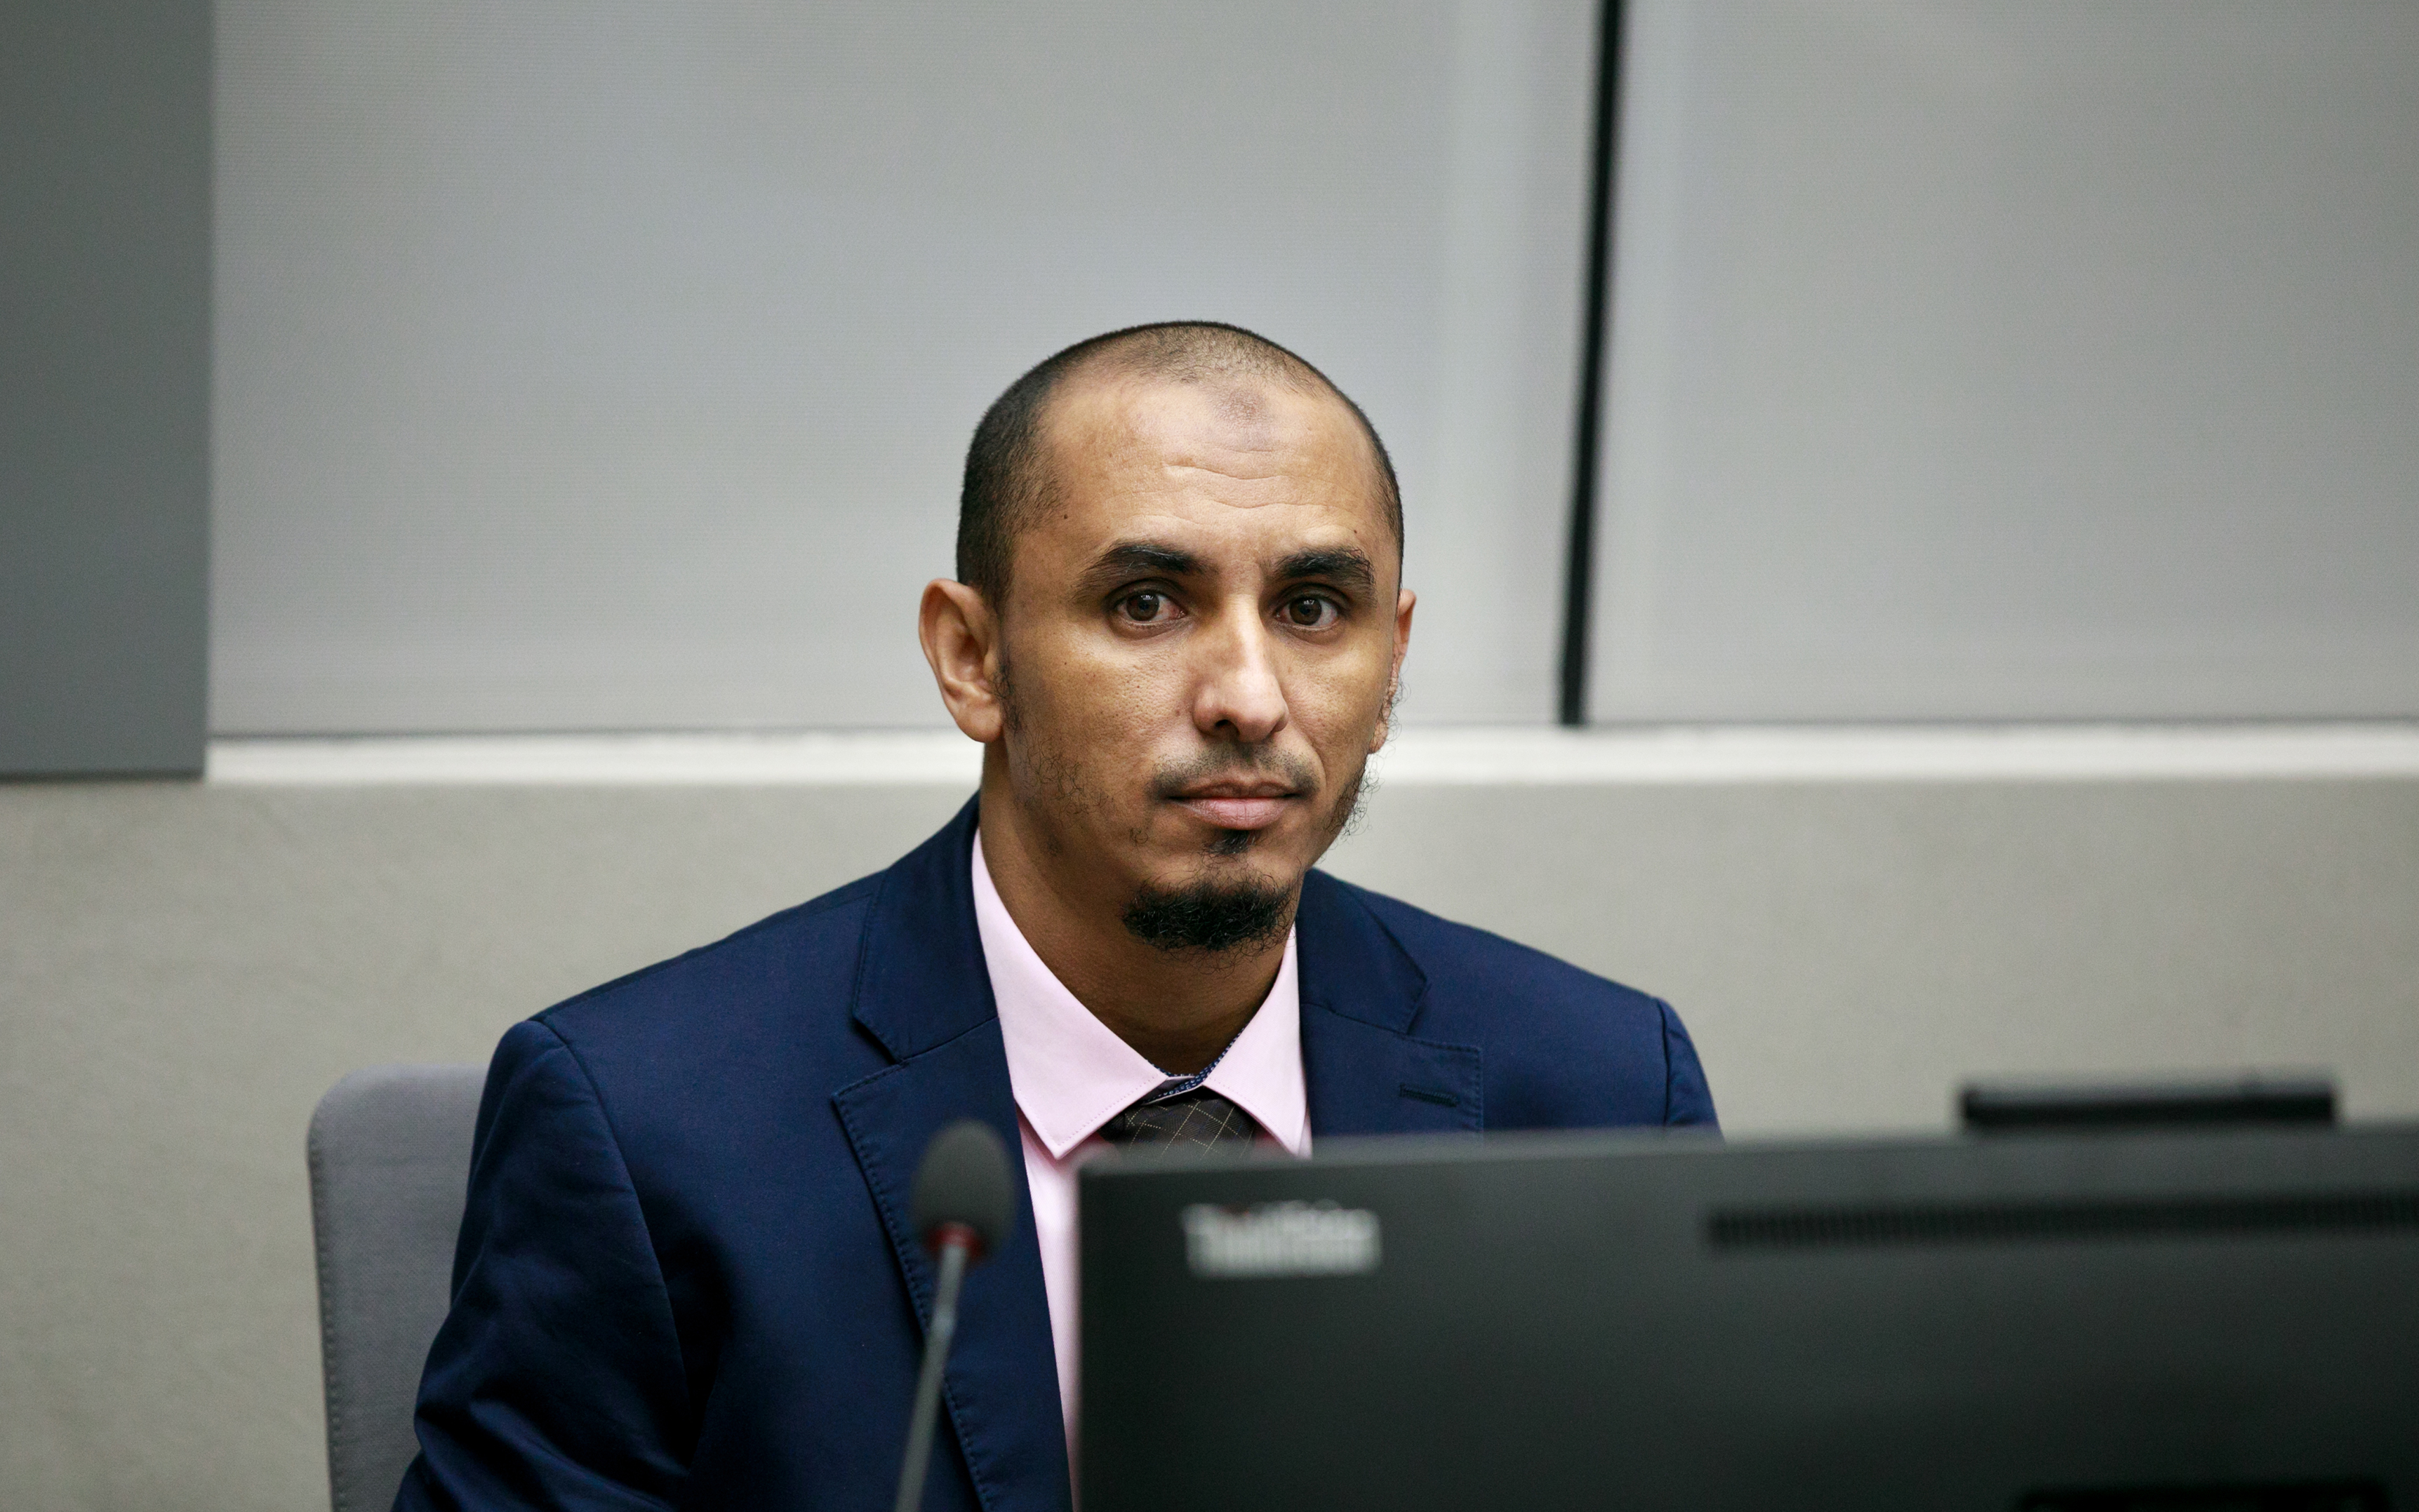 Mr Al Hassan during his initial appearance before the ICC on 4 April 2018 ©ICC-CPI